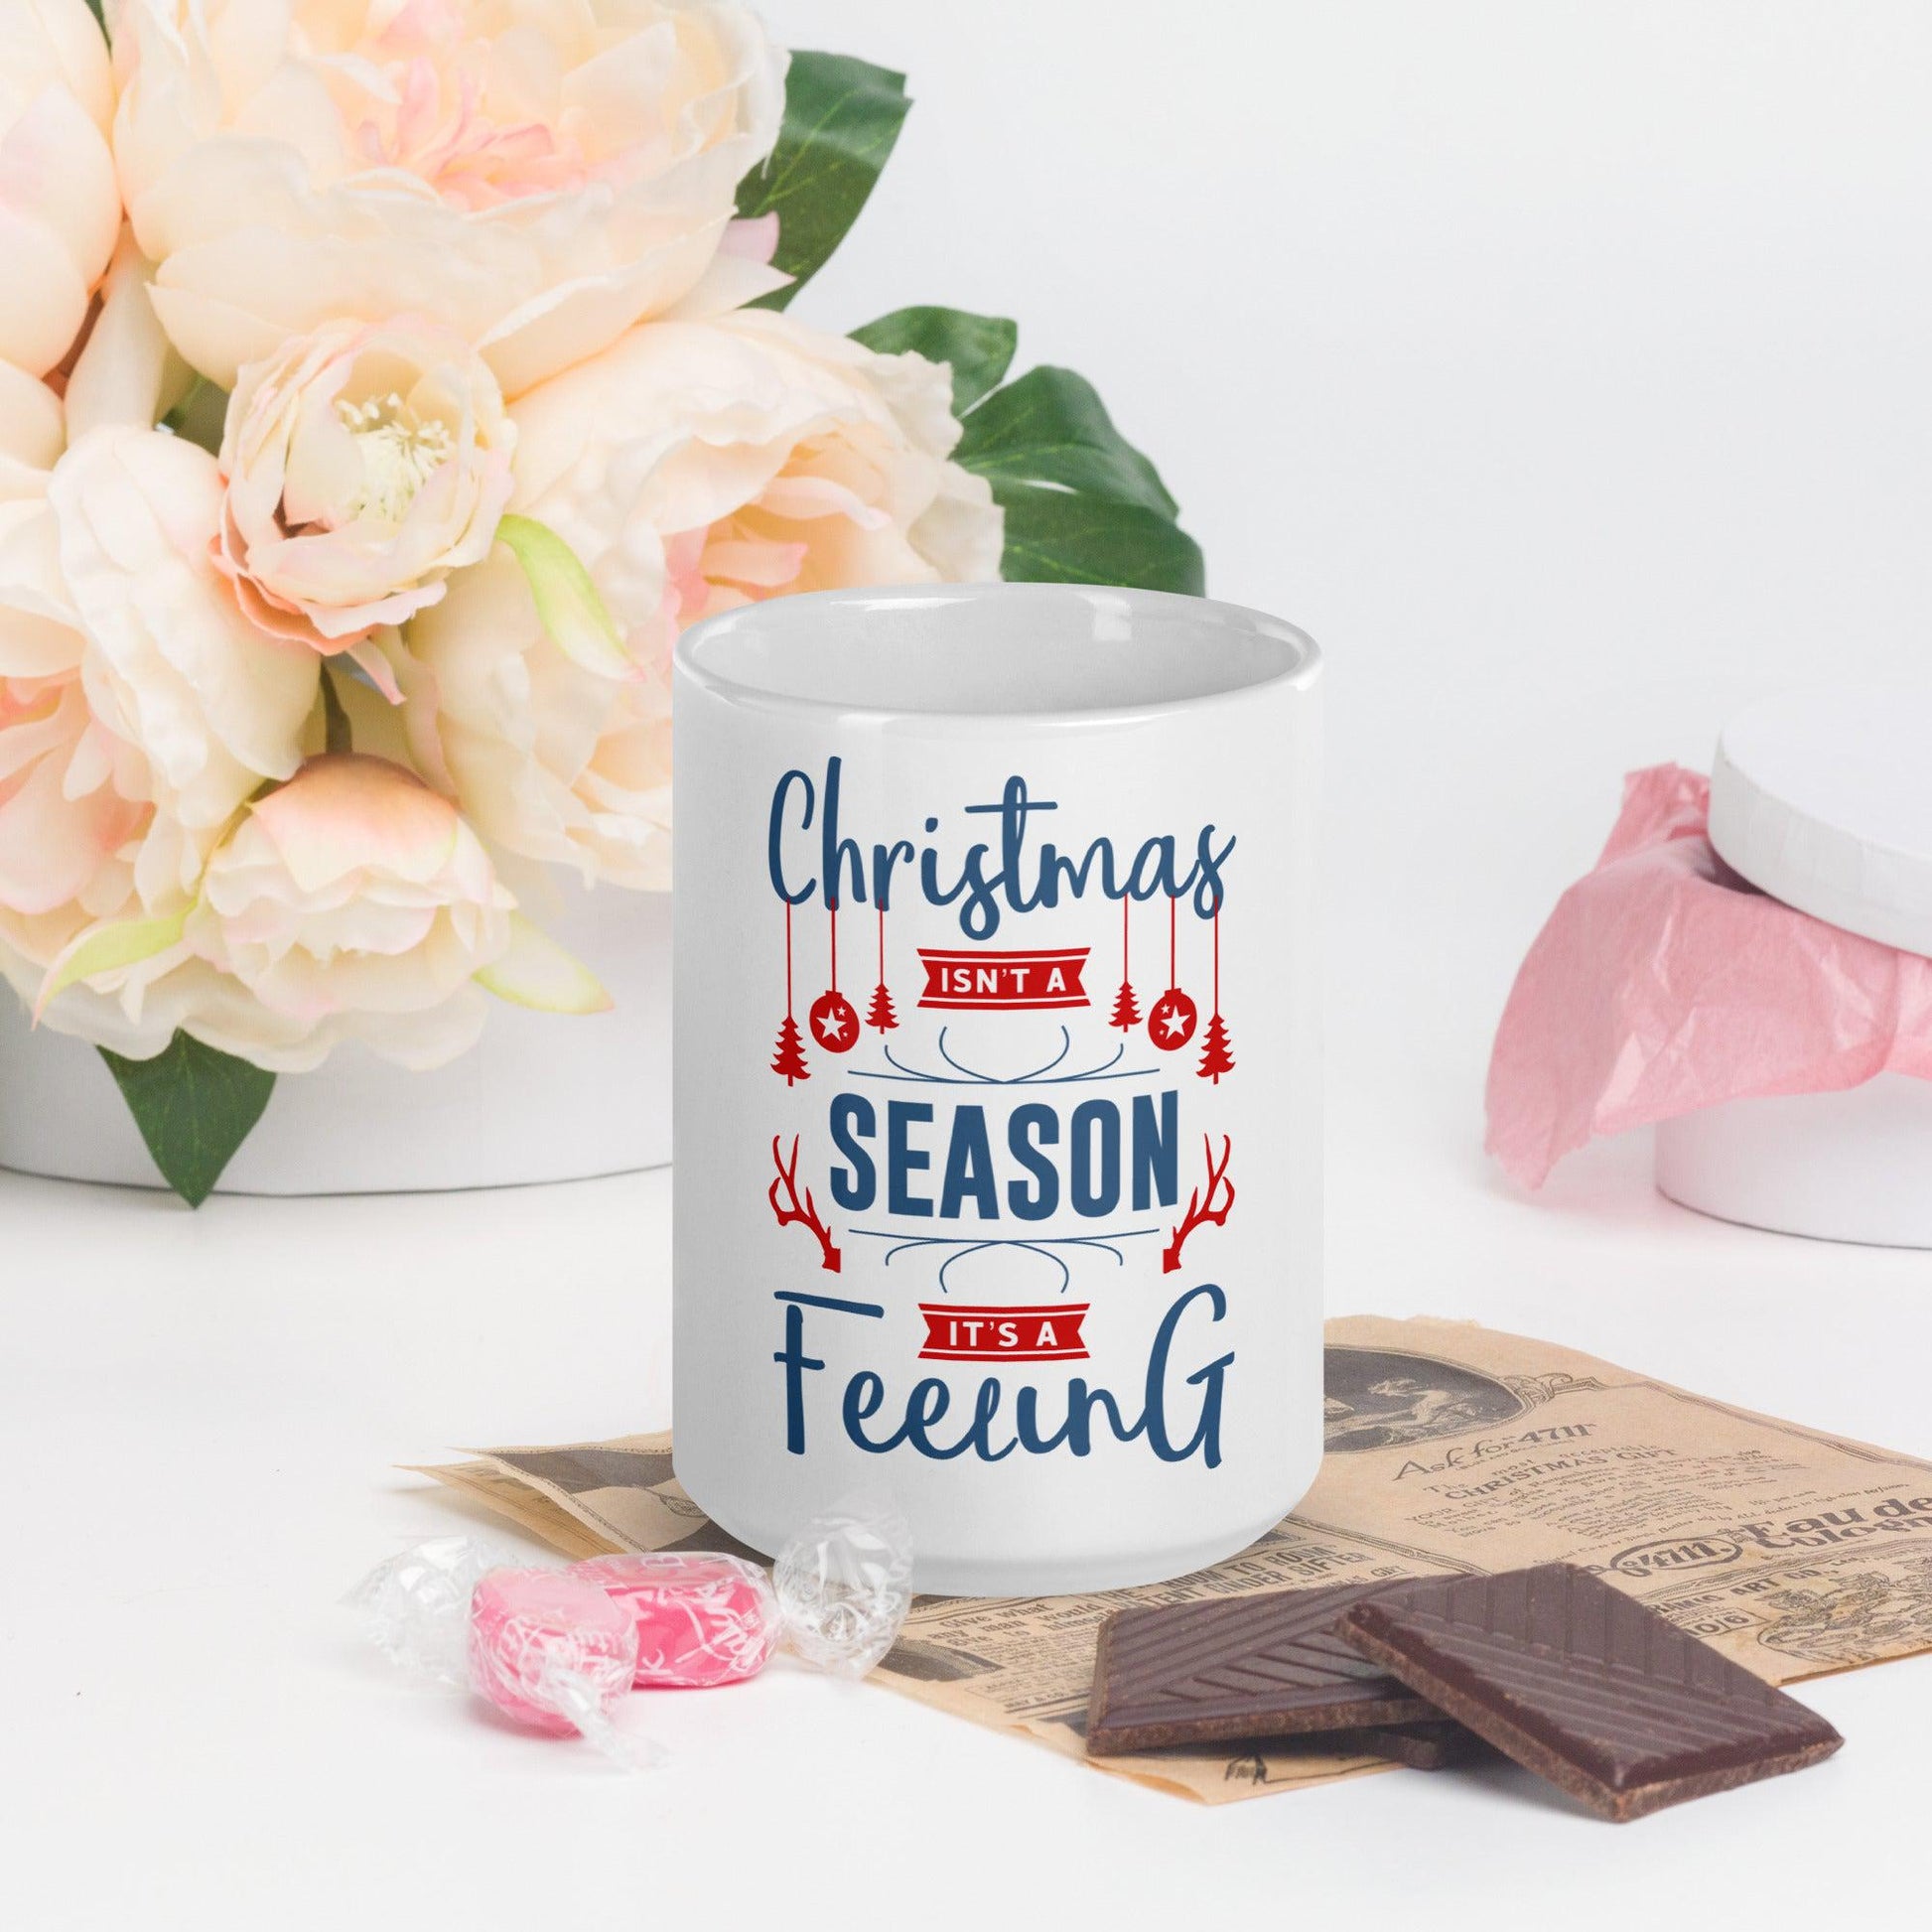 Warm Wishes in Every Sip: Experience the Festive Spirit with Our White Glossy Mug - 'Christmas Isn't a Season, It's a Feeling